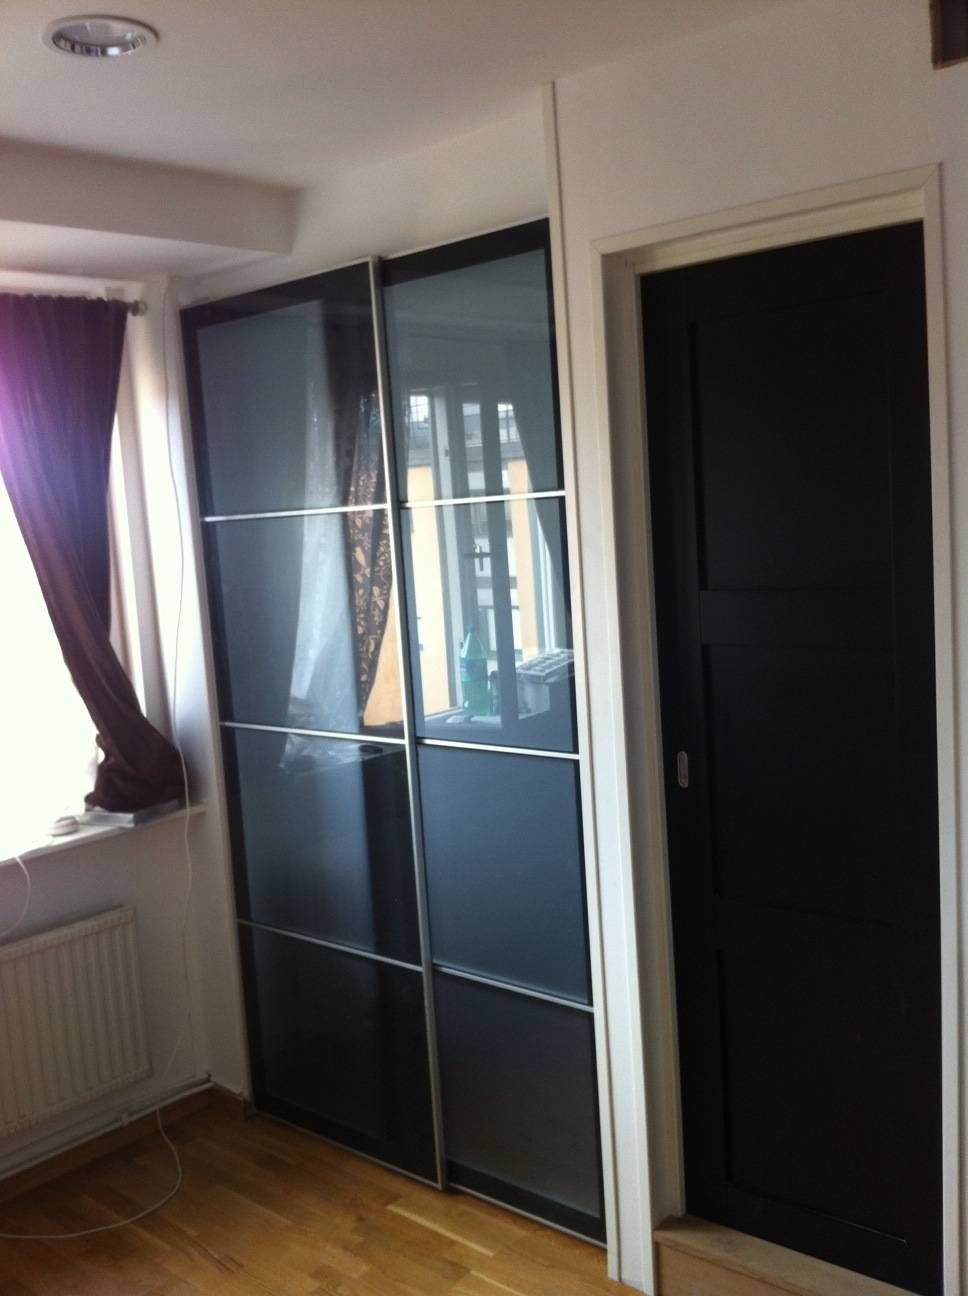 Ikea Sliding Door For Sleeping Alcove Tight Spaces – Ikea Hackers In Alcove Wardrobes Designs (View 12 of 30)